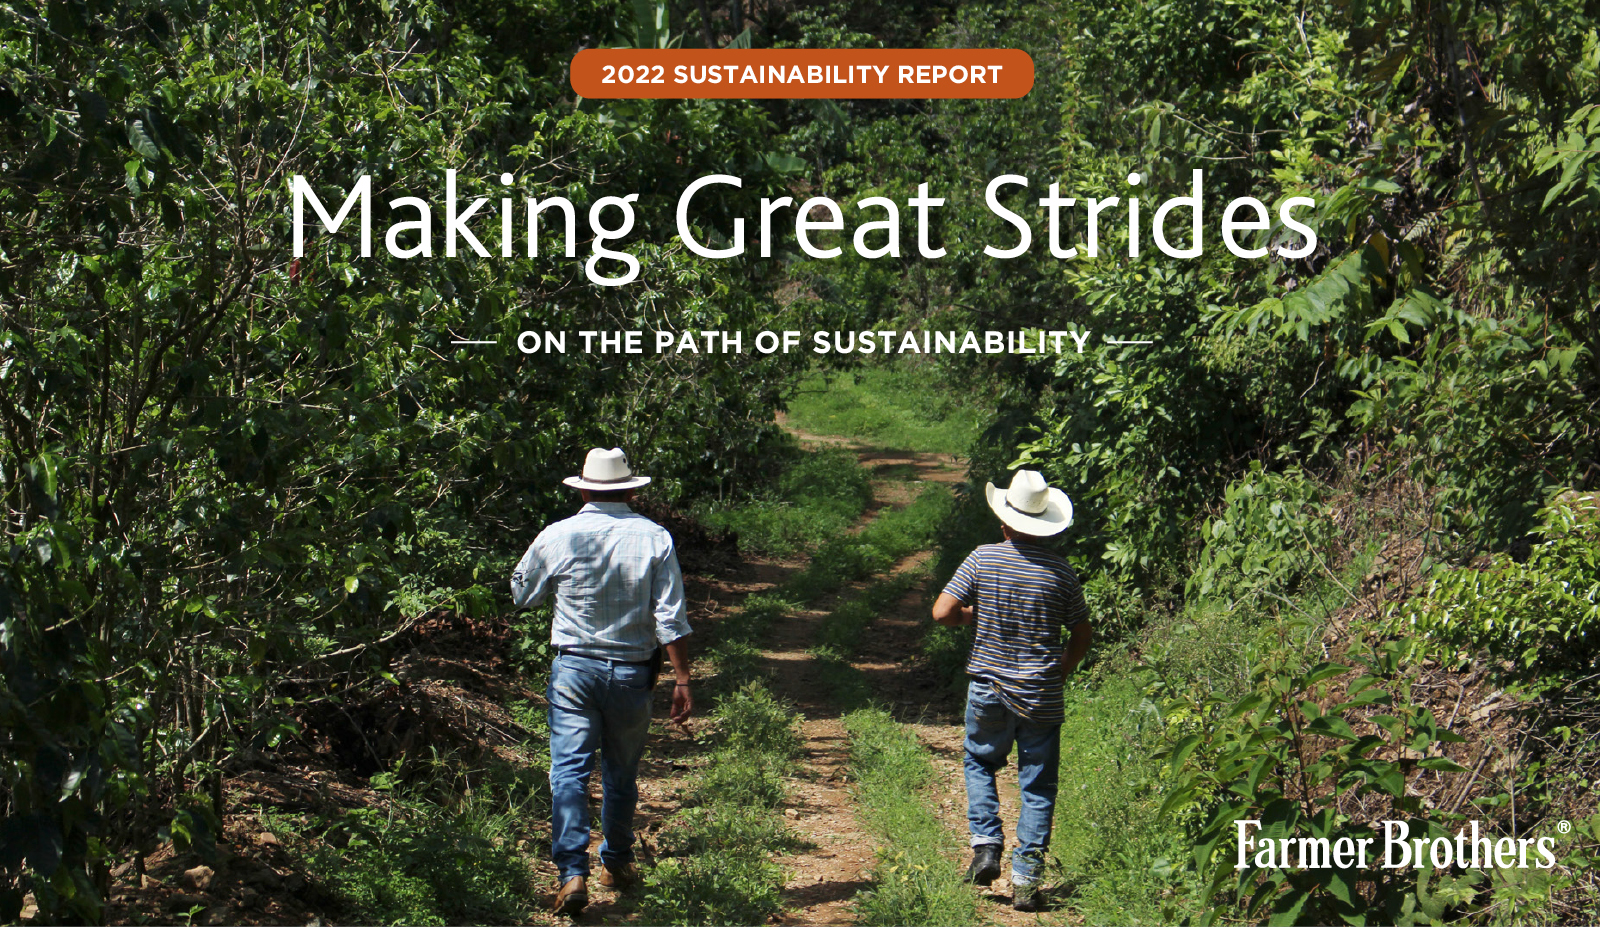 Farmer Brothers' annual sustainability report cover